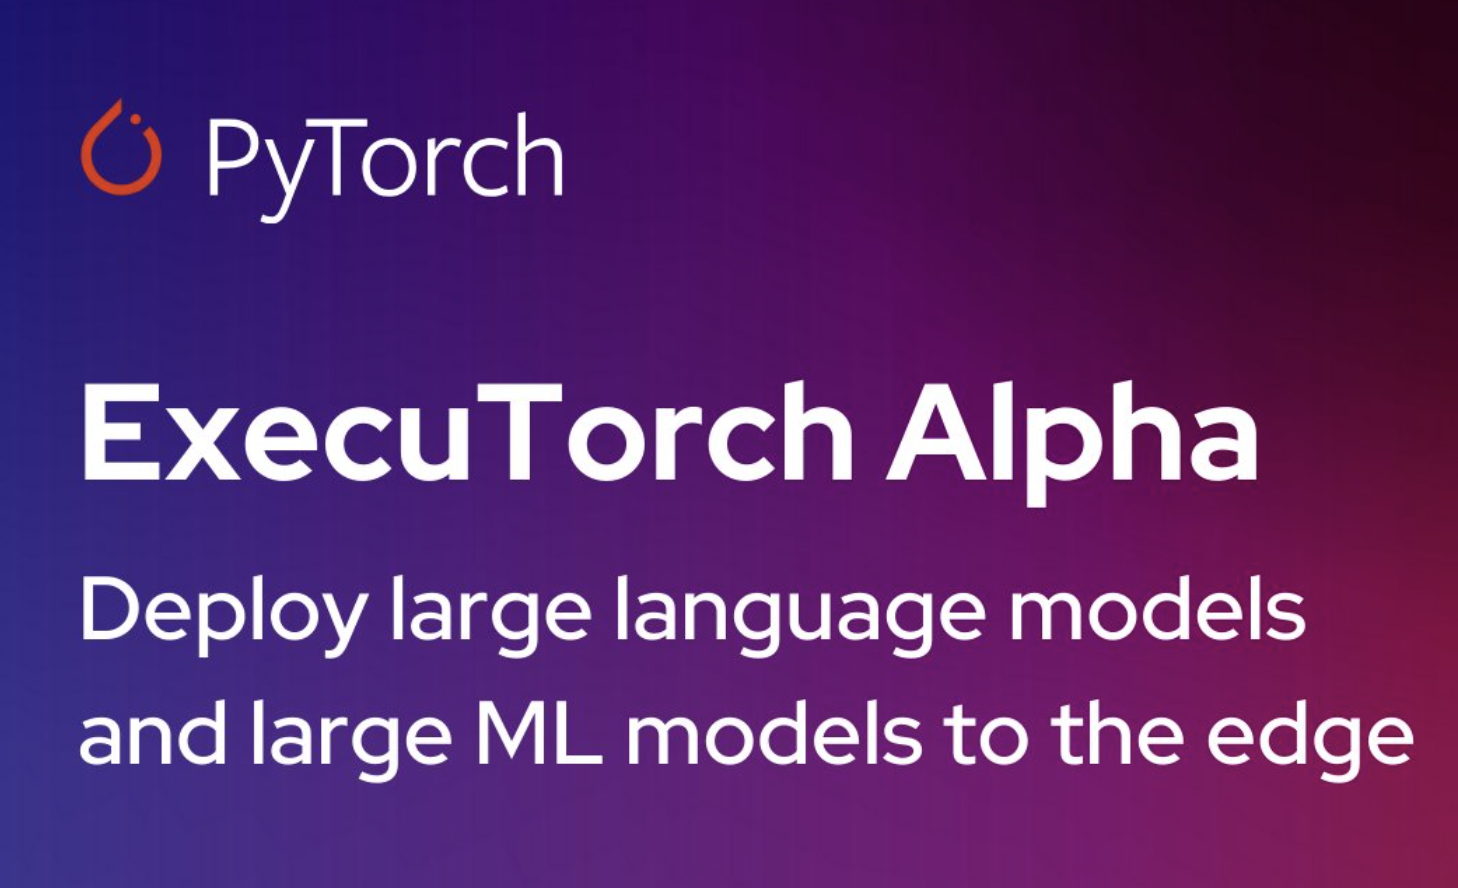  PyTorch Introduces ExecuTorch Alpha: An End-to-End Solution Focused on Deploying Large Language Models and Large Machine Learning ML Models to the Edge